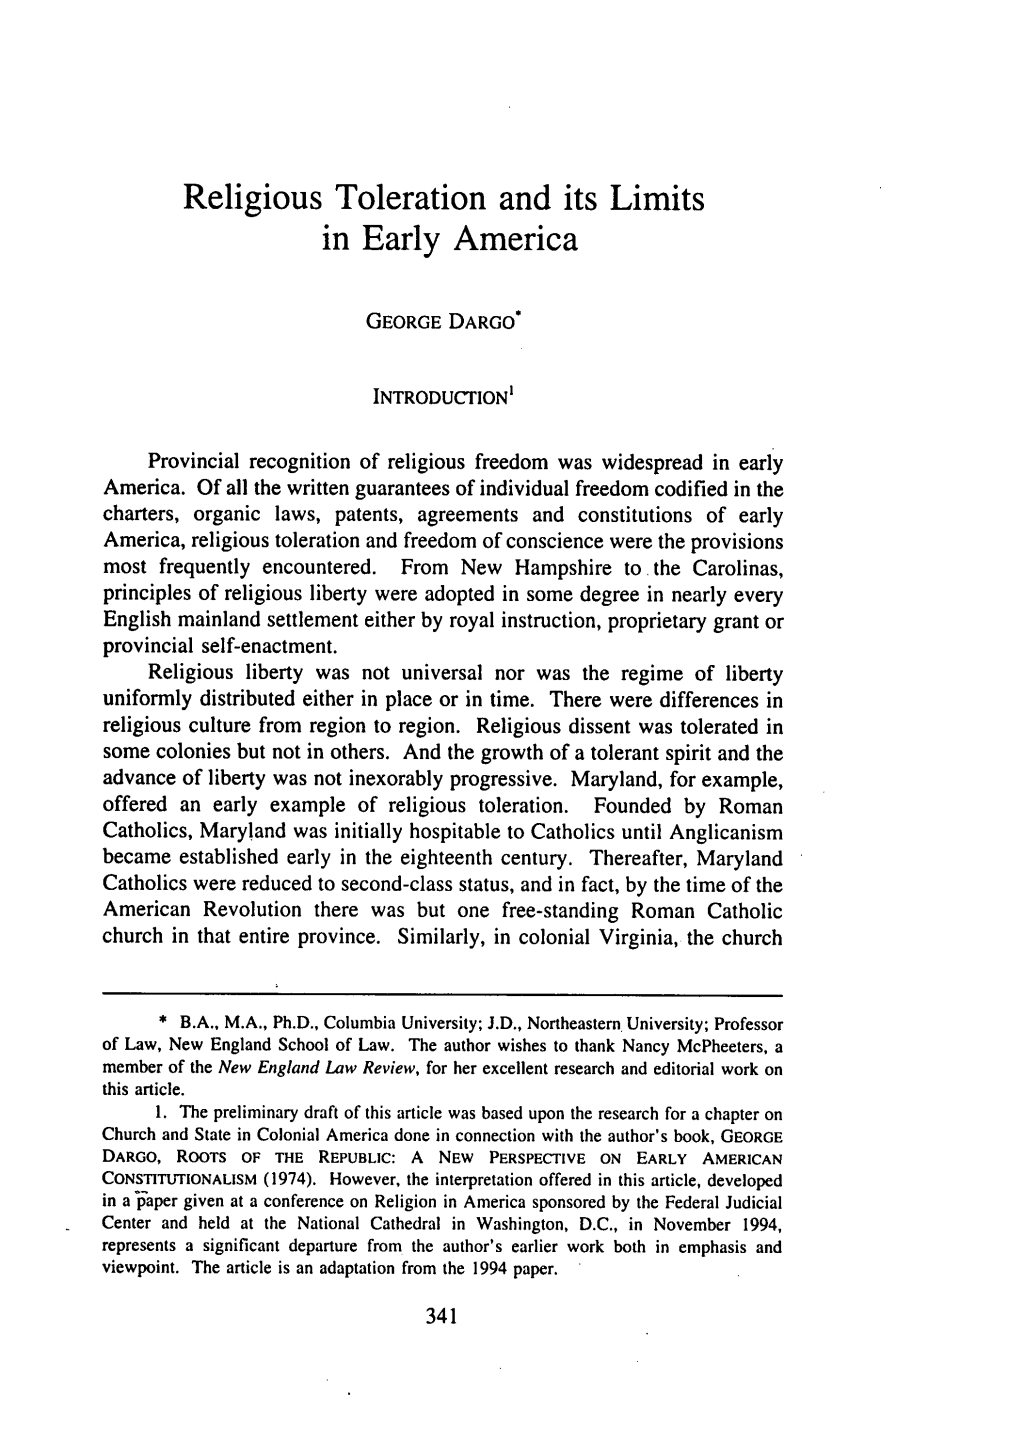 Religious Toleration and Its Limits in Early America